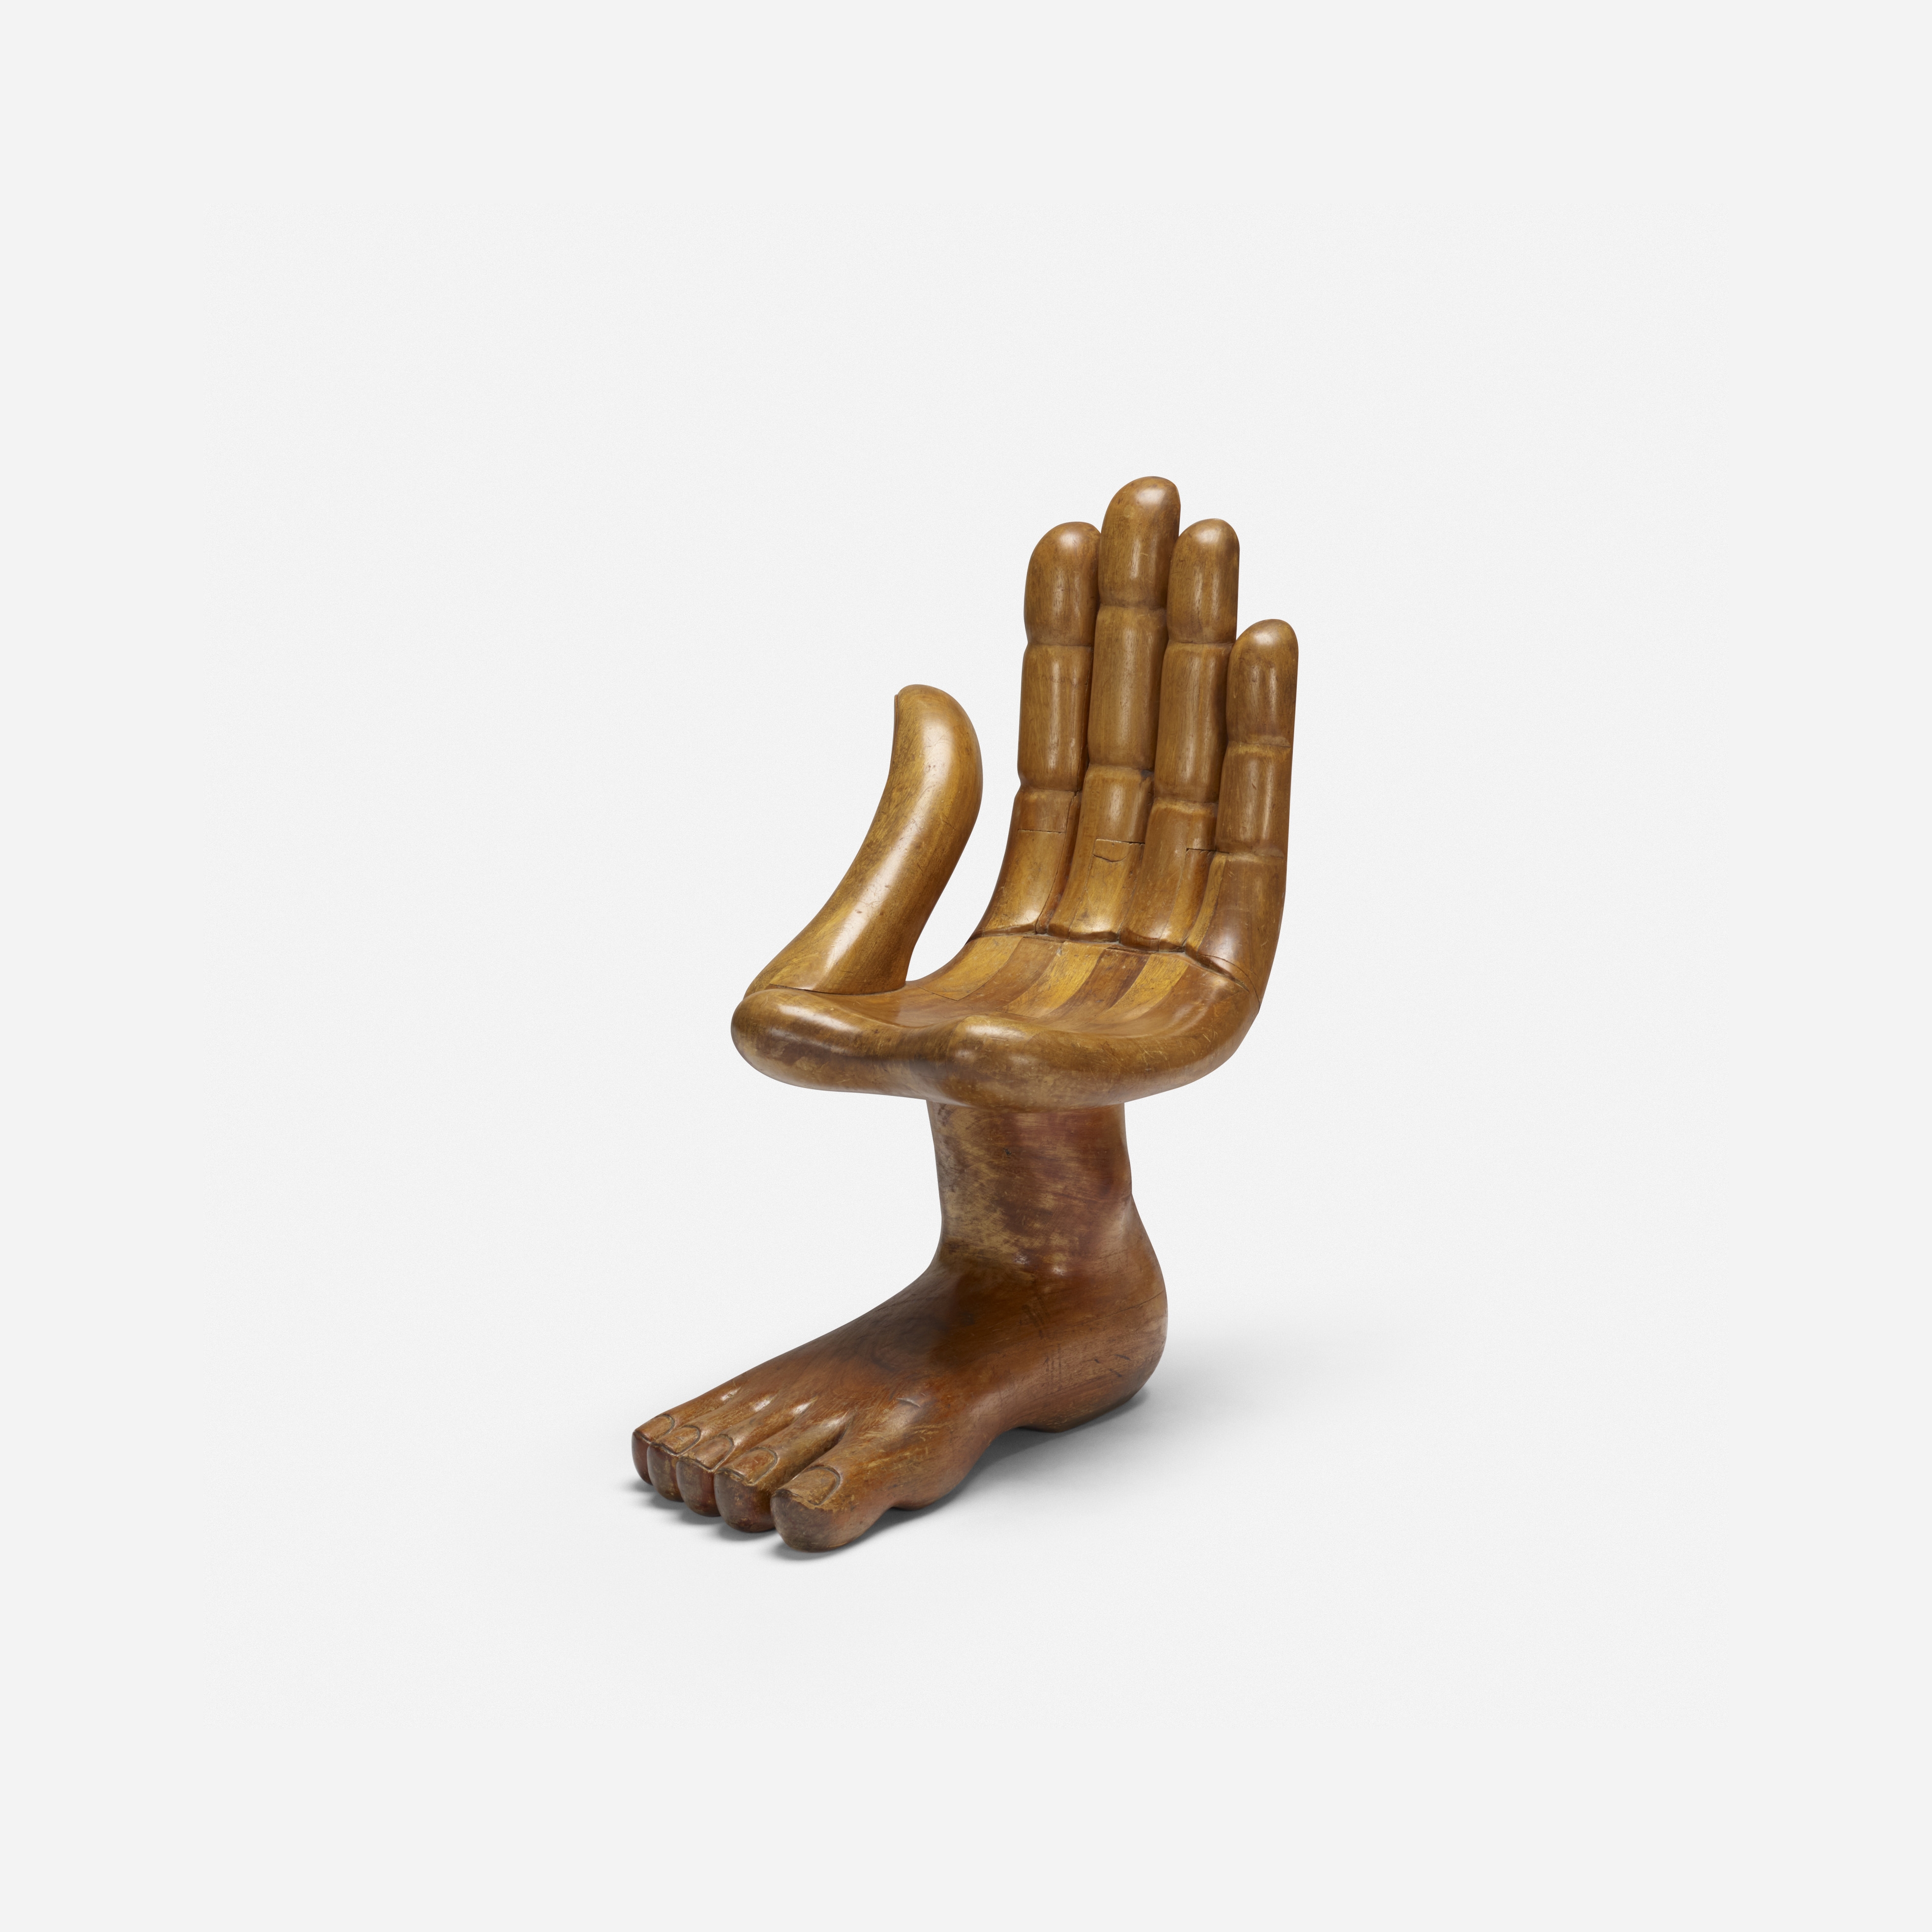 Hand Foot chair by Pedro Friedeberg